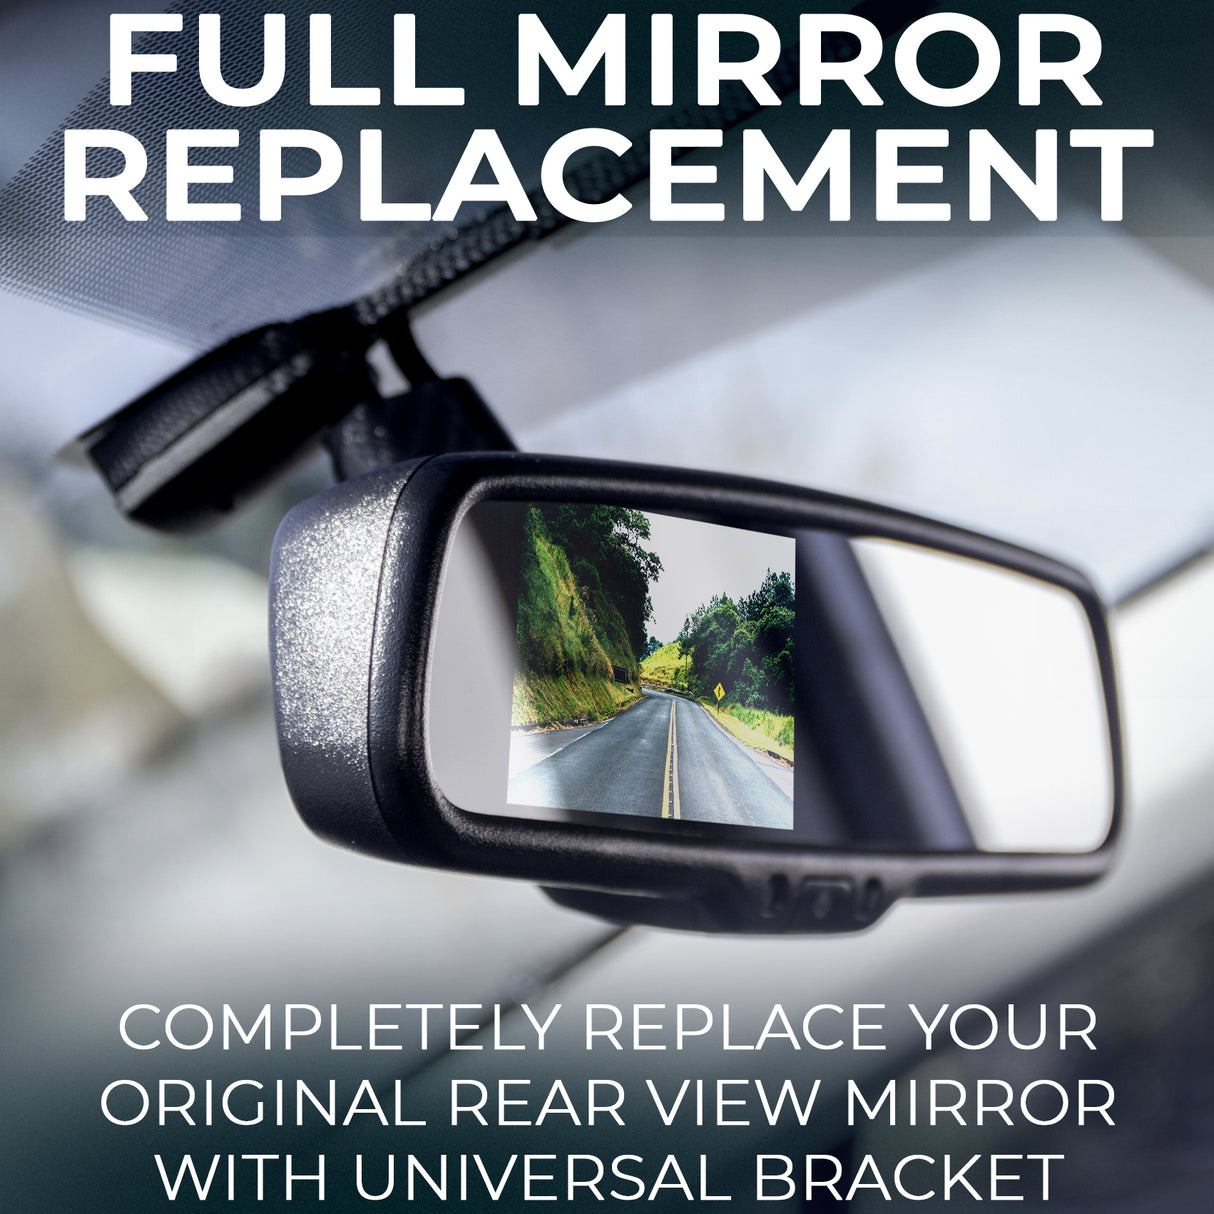 Master Tailgaters 10.5" OEM Rear View Mirror with 4.3" LCD Screen + Compass & Temperature | Rearview Universal Fit Mount | Auto Adjusting Brightness LCD | Anti Glare | Full Original Mirror Replacement